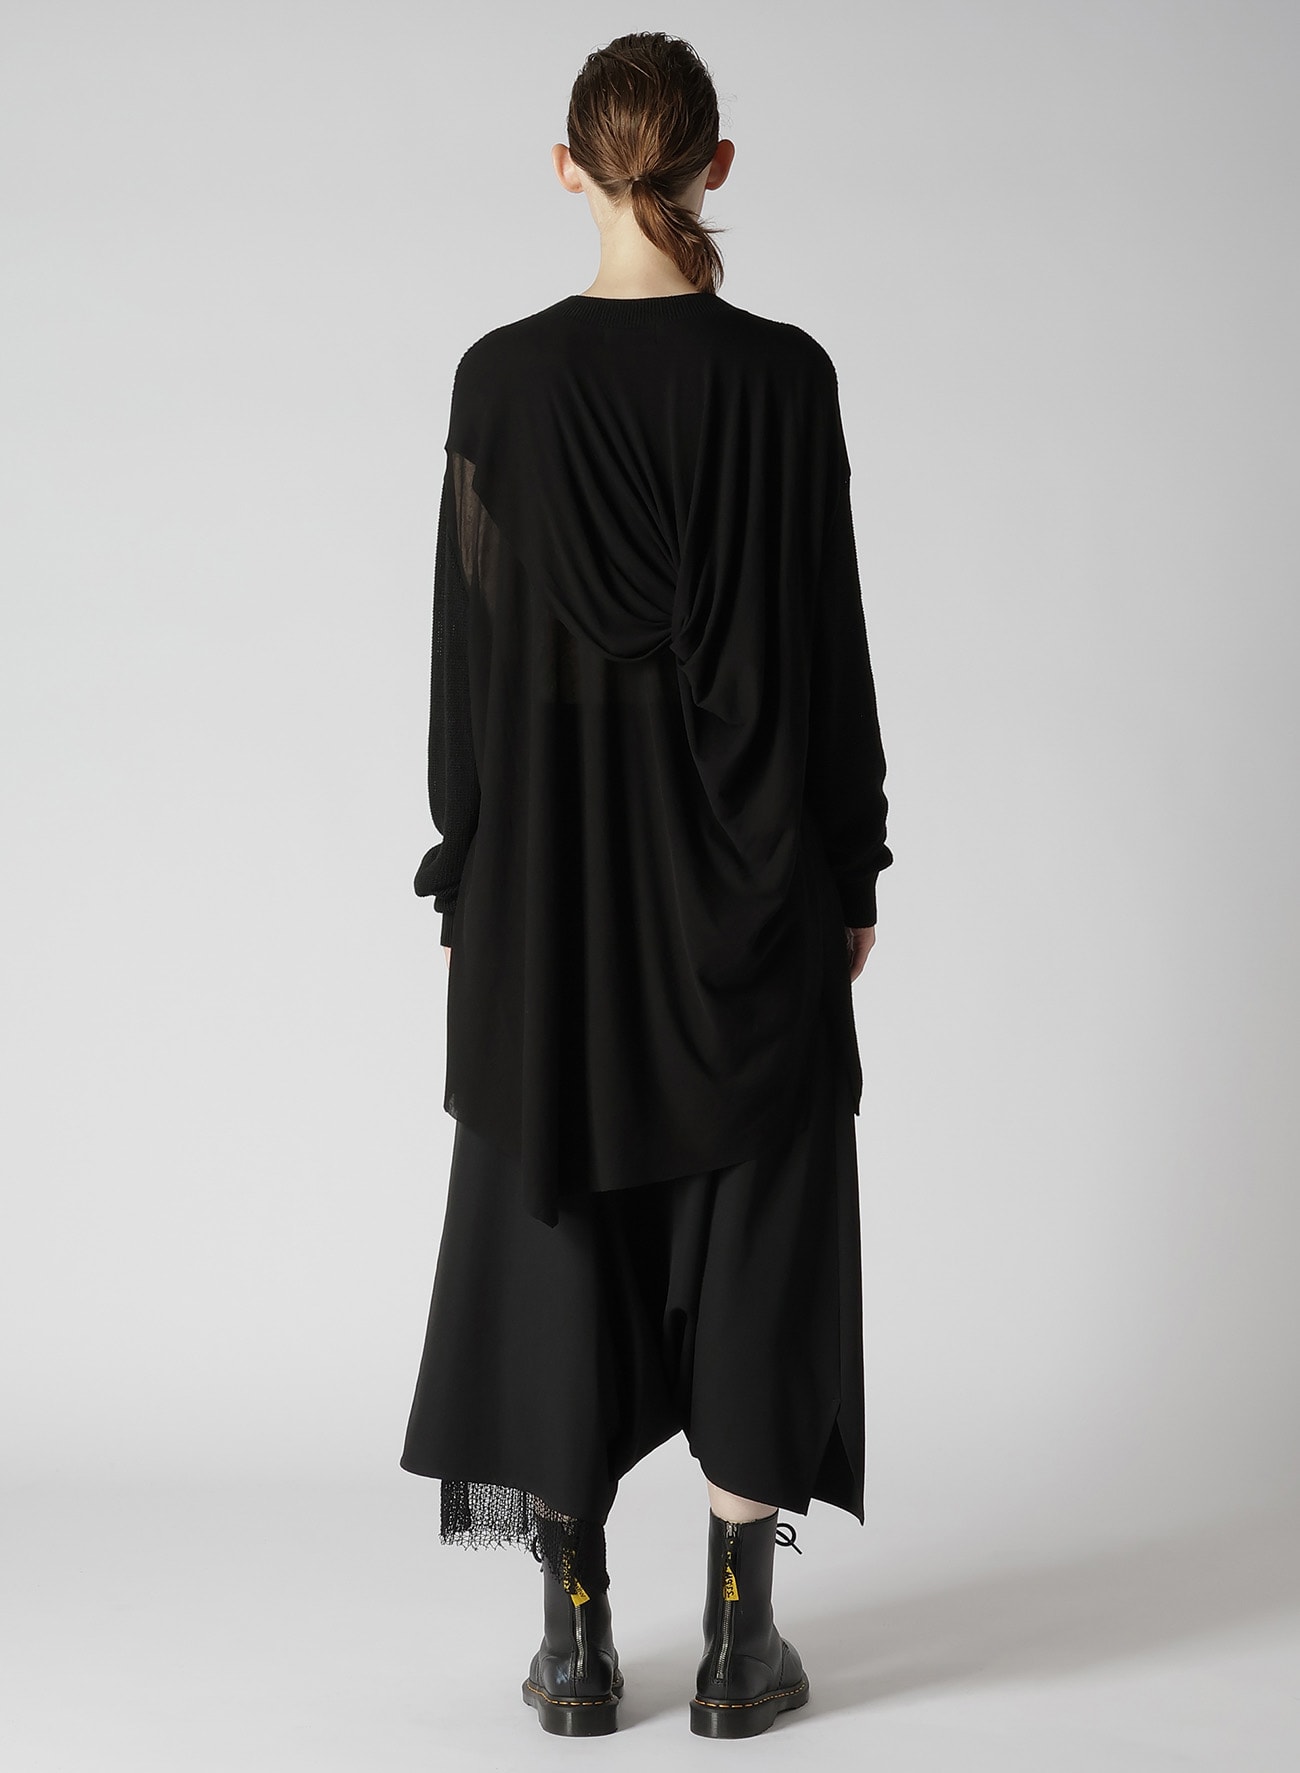 COTTON BREND BACK DRAPE LONG SLEEVE KNIT PULLOVER(S Black): Y's 